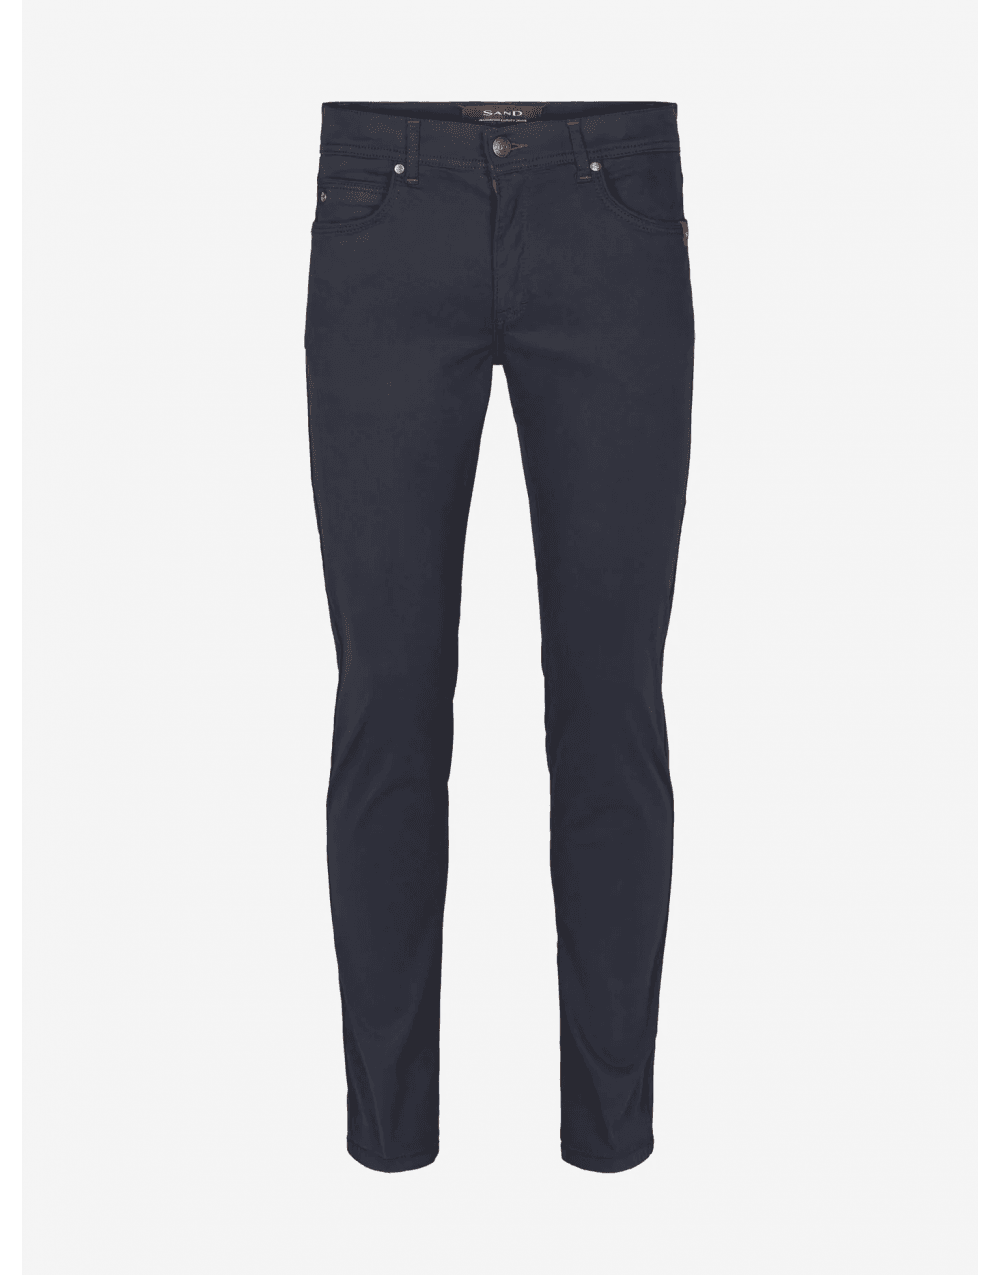 SAND Burton Suede Touch Trousers Col: 590 Navy, Size: 30/34